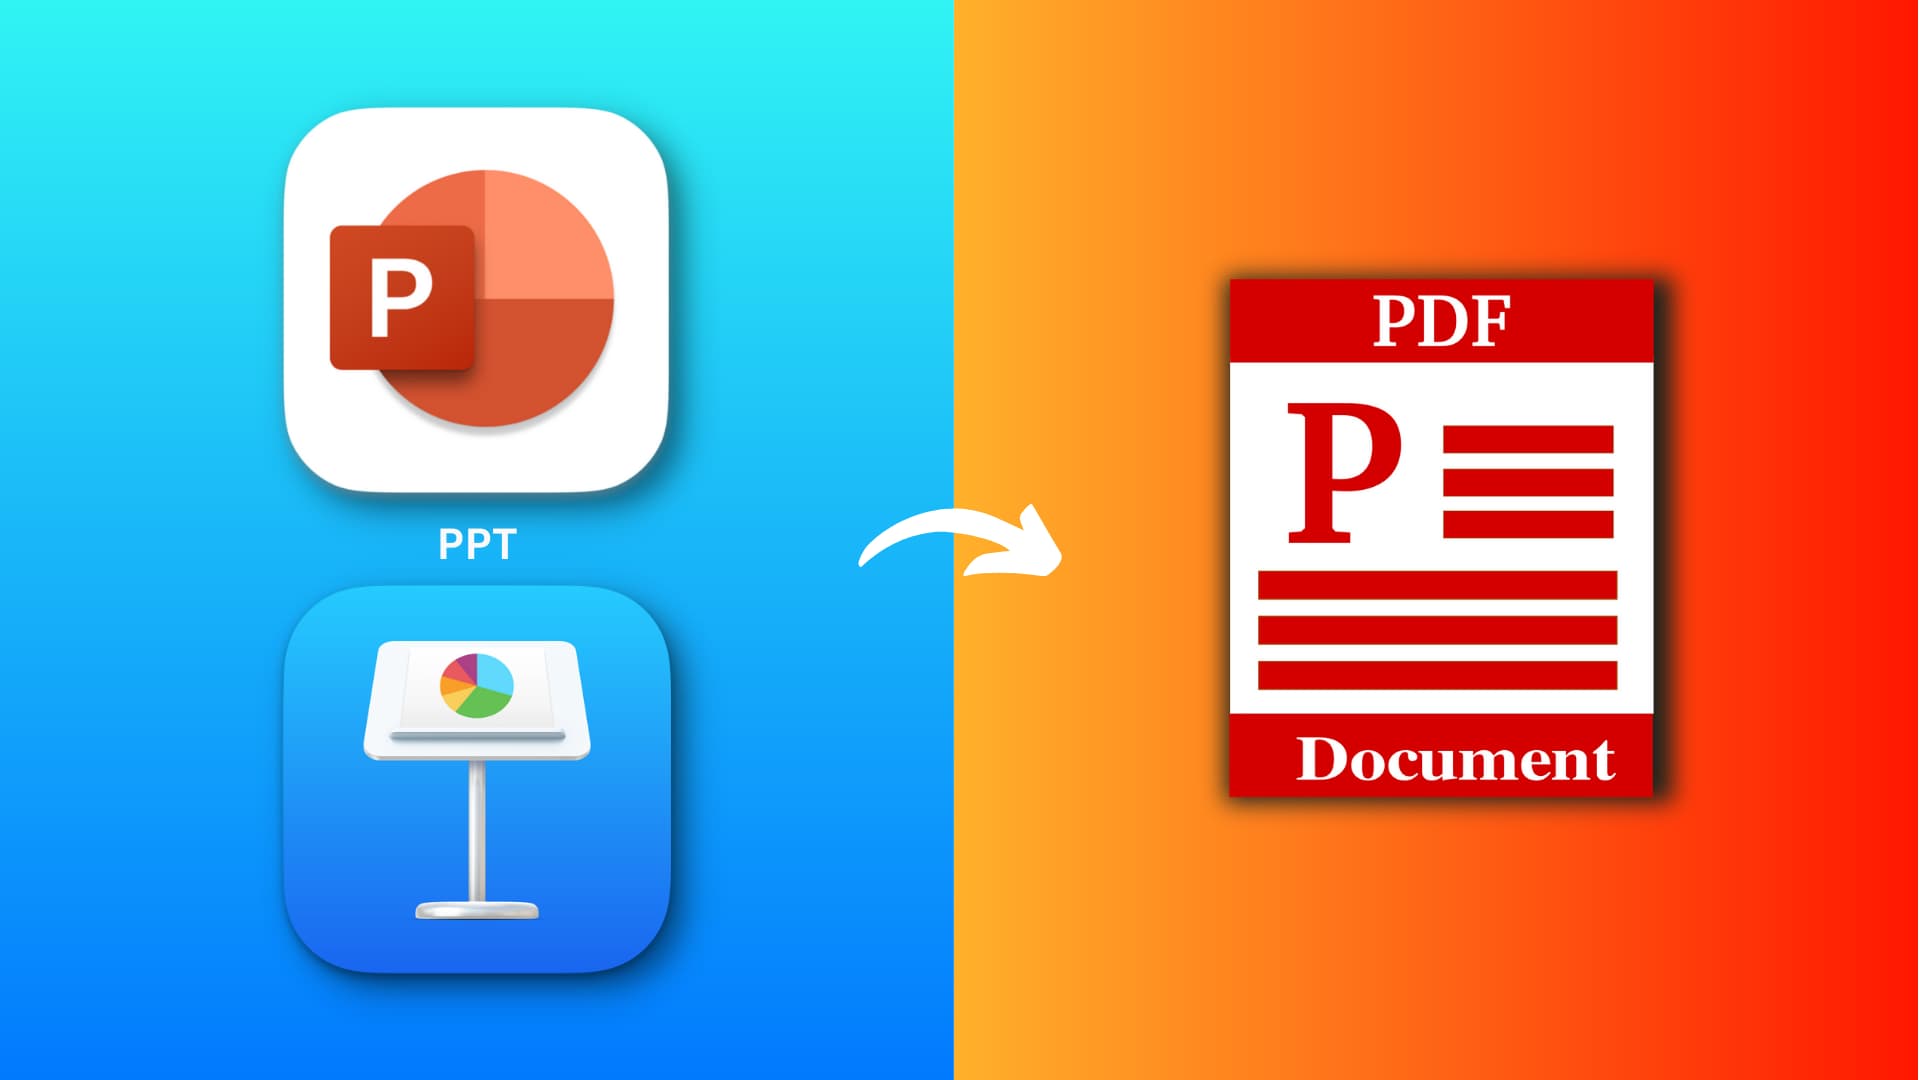 How to convert a PowerPoint presentation to PDF on iPhone, iPad, and Mac